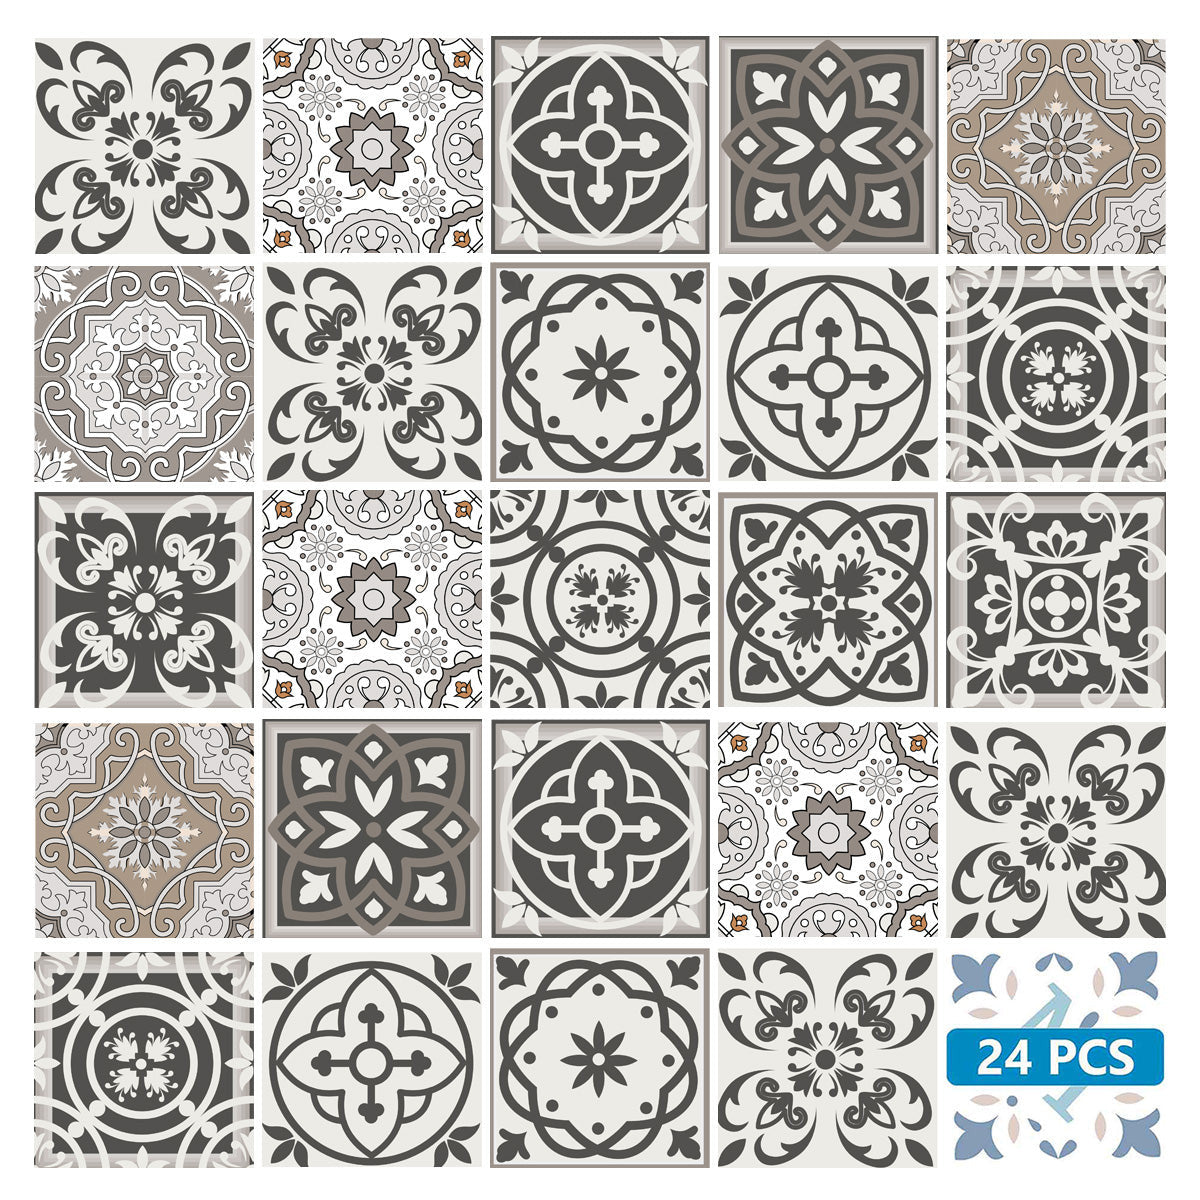 7" x 7" Wood Brown and White Mosaic Peel and Stick Removable Tiles